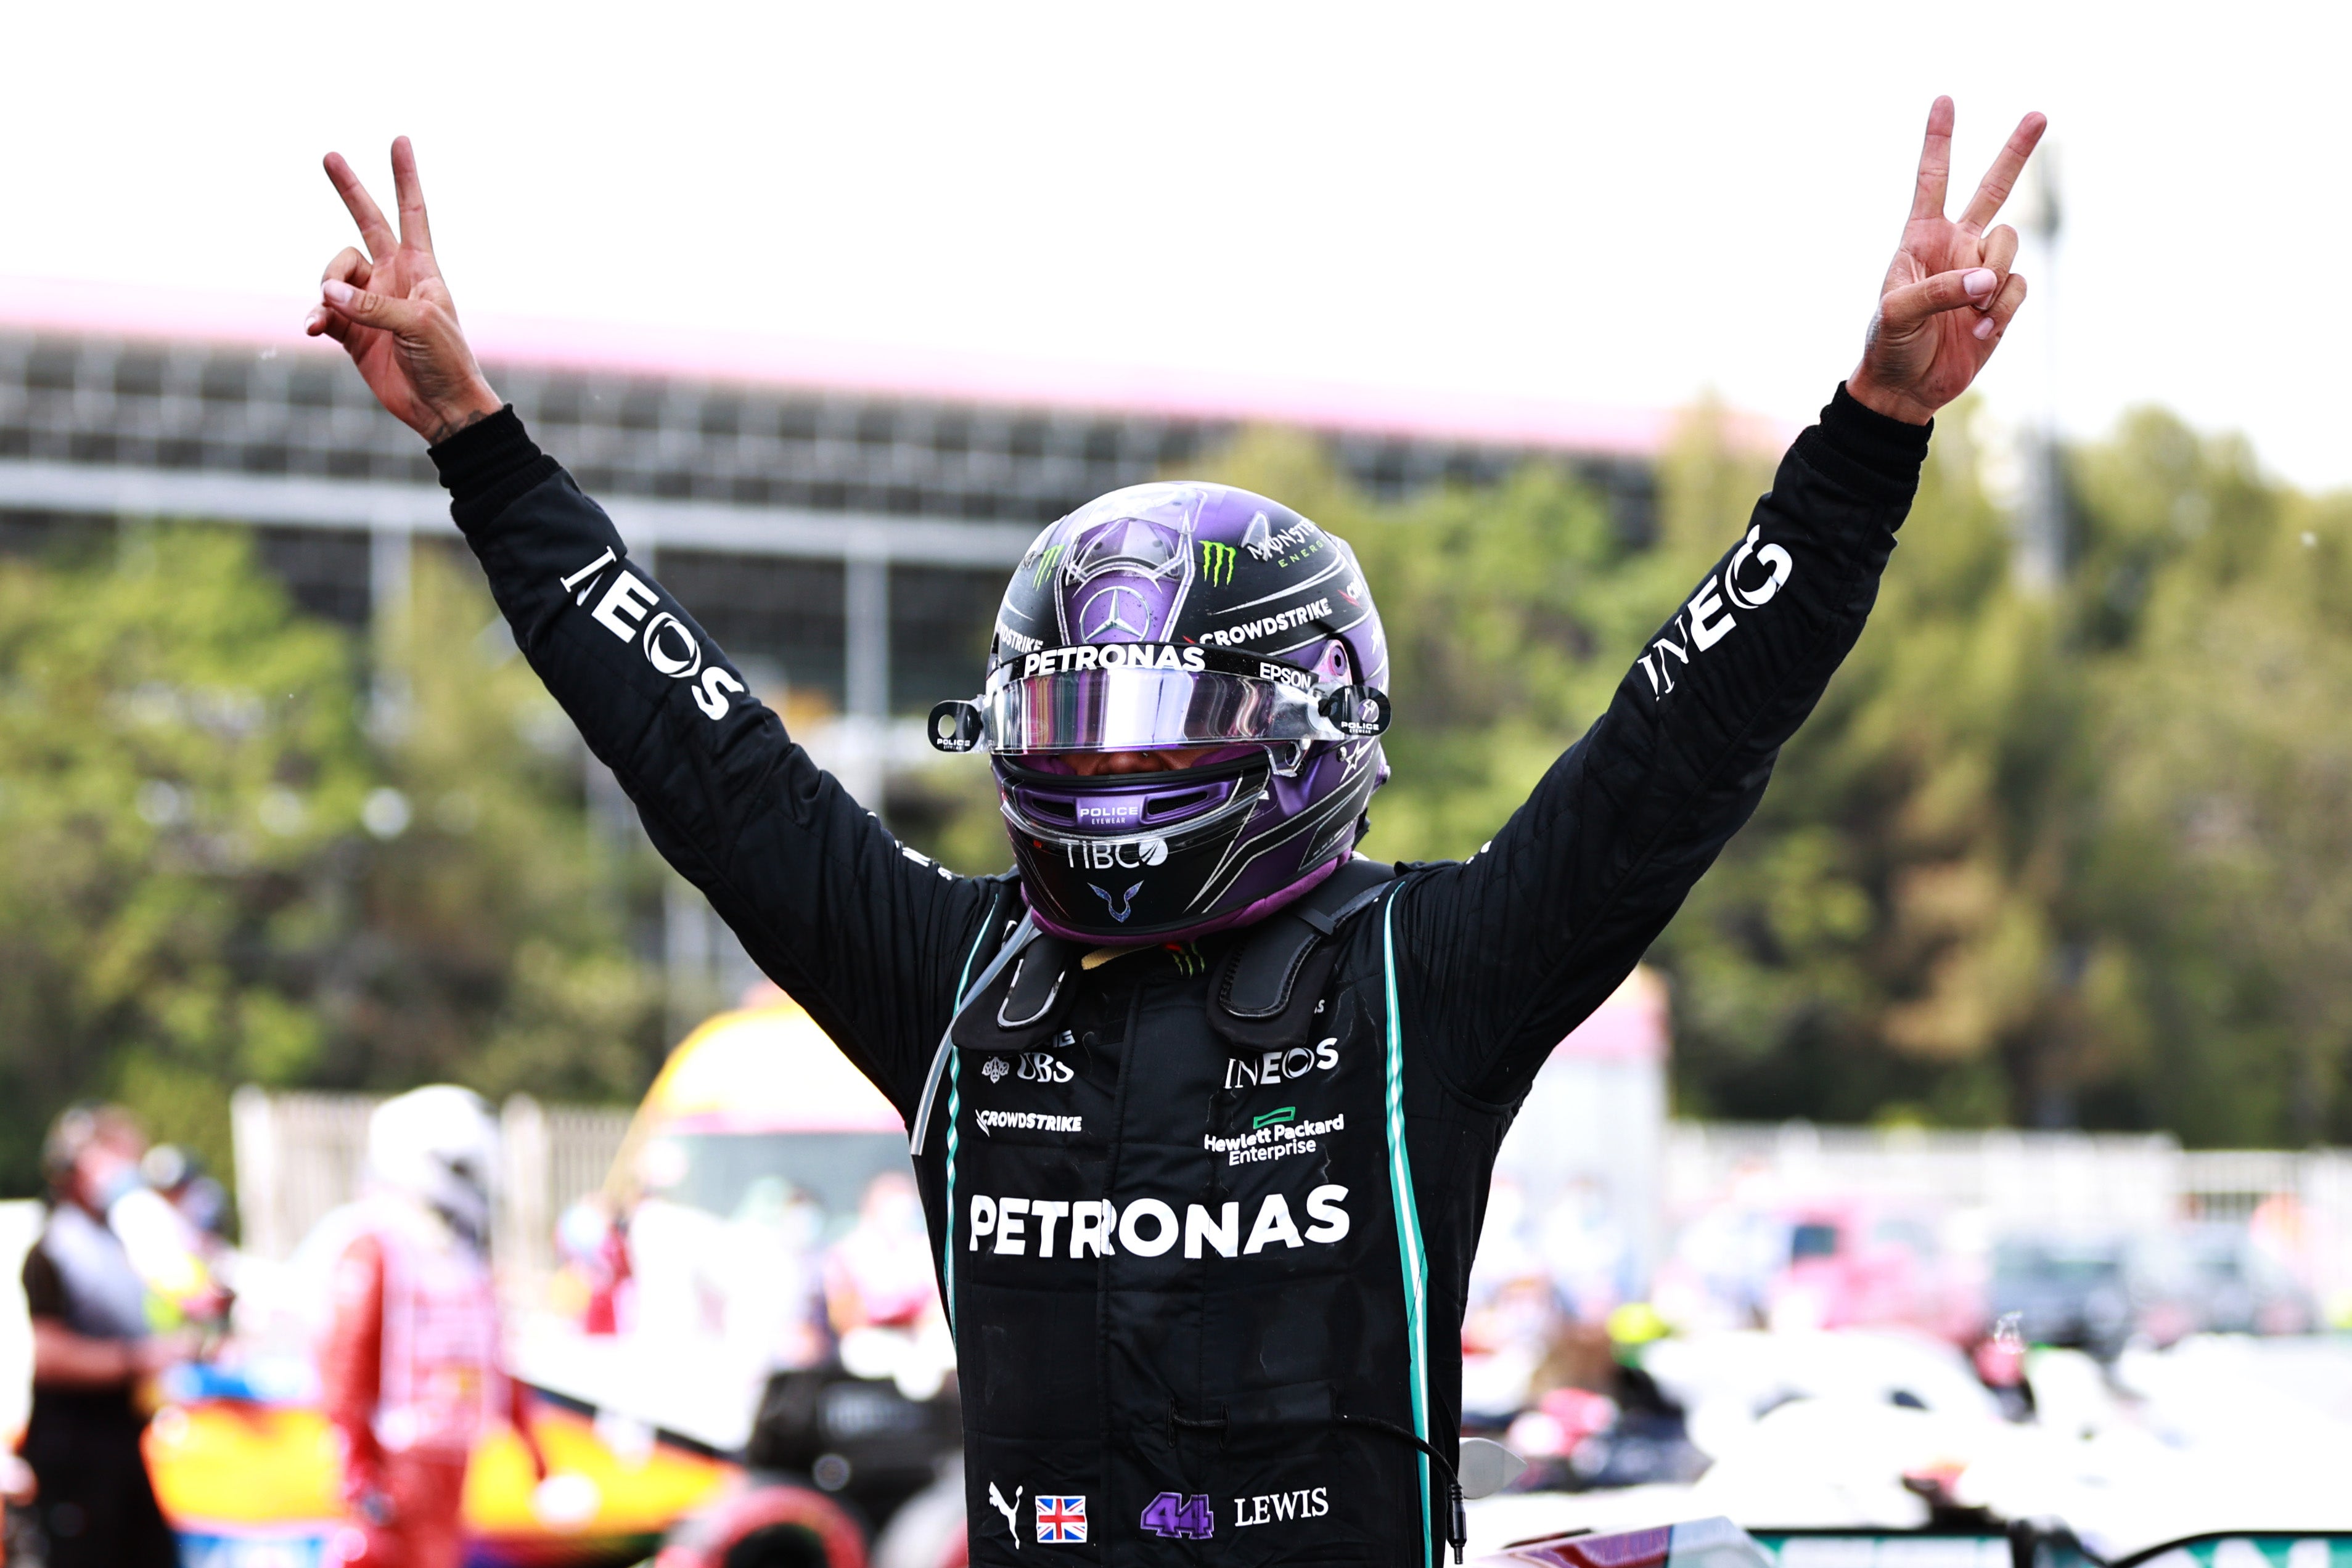 Lewis Hamilton Wins Spanish Grand Prix To Extend Championship Lead Over Max Verstappen The